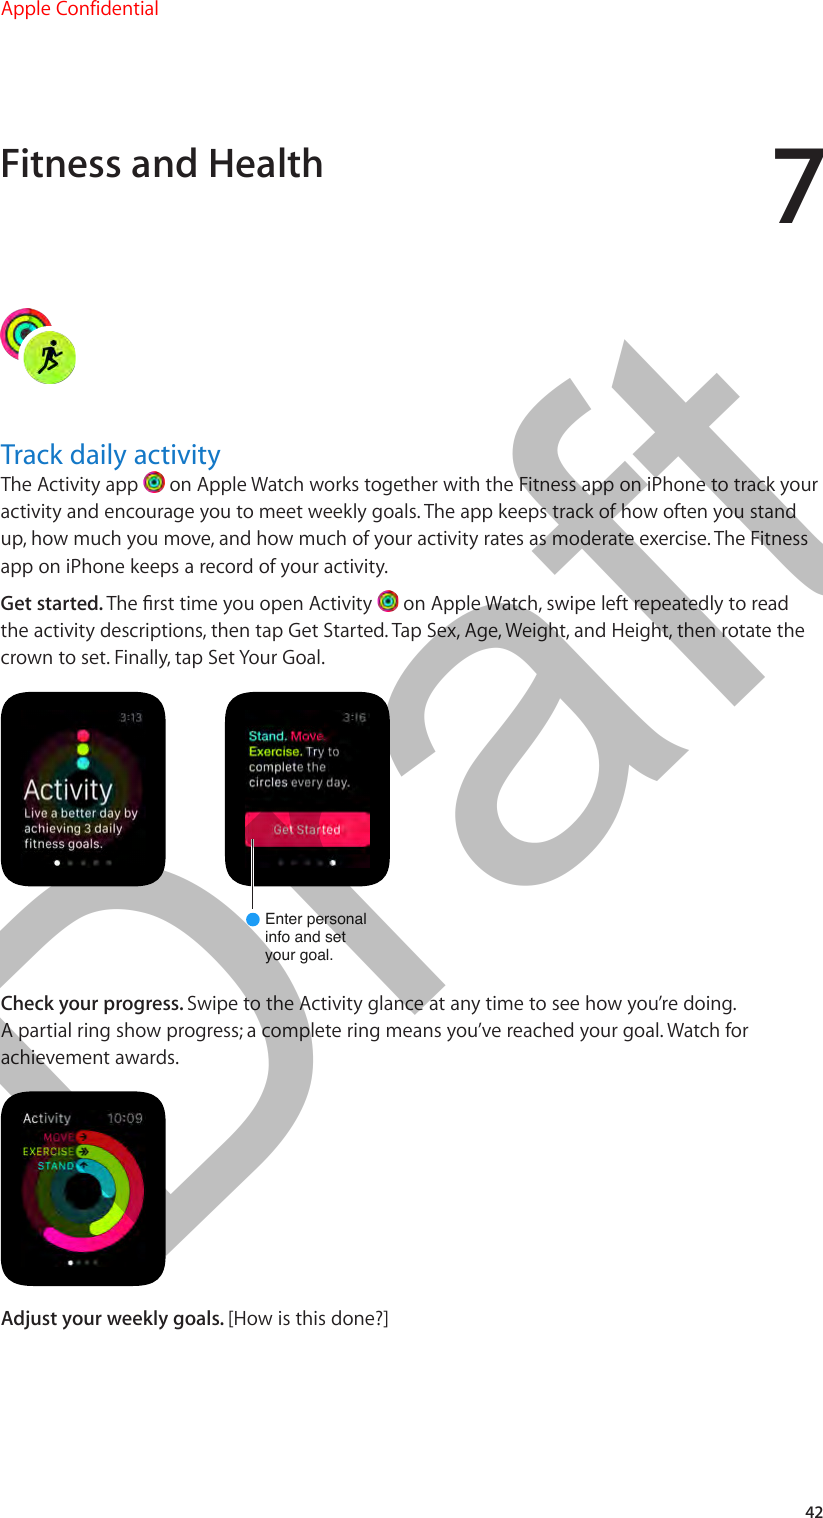 742Track daily activityThe Activity app   on Apple Watch works together with the Fitness app on iPhone to track your activity and encourage you to meet weekly goals. The app keeps track of how often you stand up, how much you move, and how much of your activity rates as moderate exercise. The Fitness app on iPhone keeps a record of your activity.Get started. The rst time you open Activity   on Apple Watch, swipe left repeatedly to read the activity descriptions, then tap Get Started. Tap Sex, Age, Weight, and Height, then rotate the crown to set. Finally, tap Set Your Goal.Enter personalinfo and setyour goal.Check your progress. Swipe to the Activity glance at any time to see how you’re doing. A partial ring show progress; a complete ring means you’ve reached your goal. Watch for achievement awards.Adjust your weekly goals. [How is this done?]Fitness and HealthApple Confidential  100% resize factorDraft